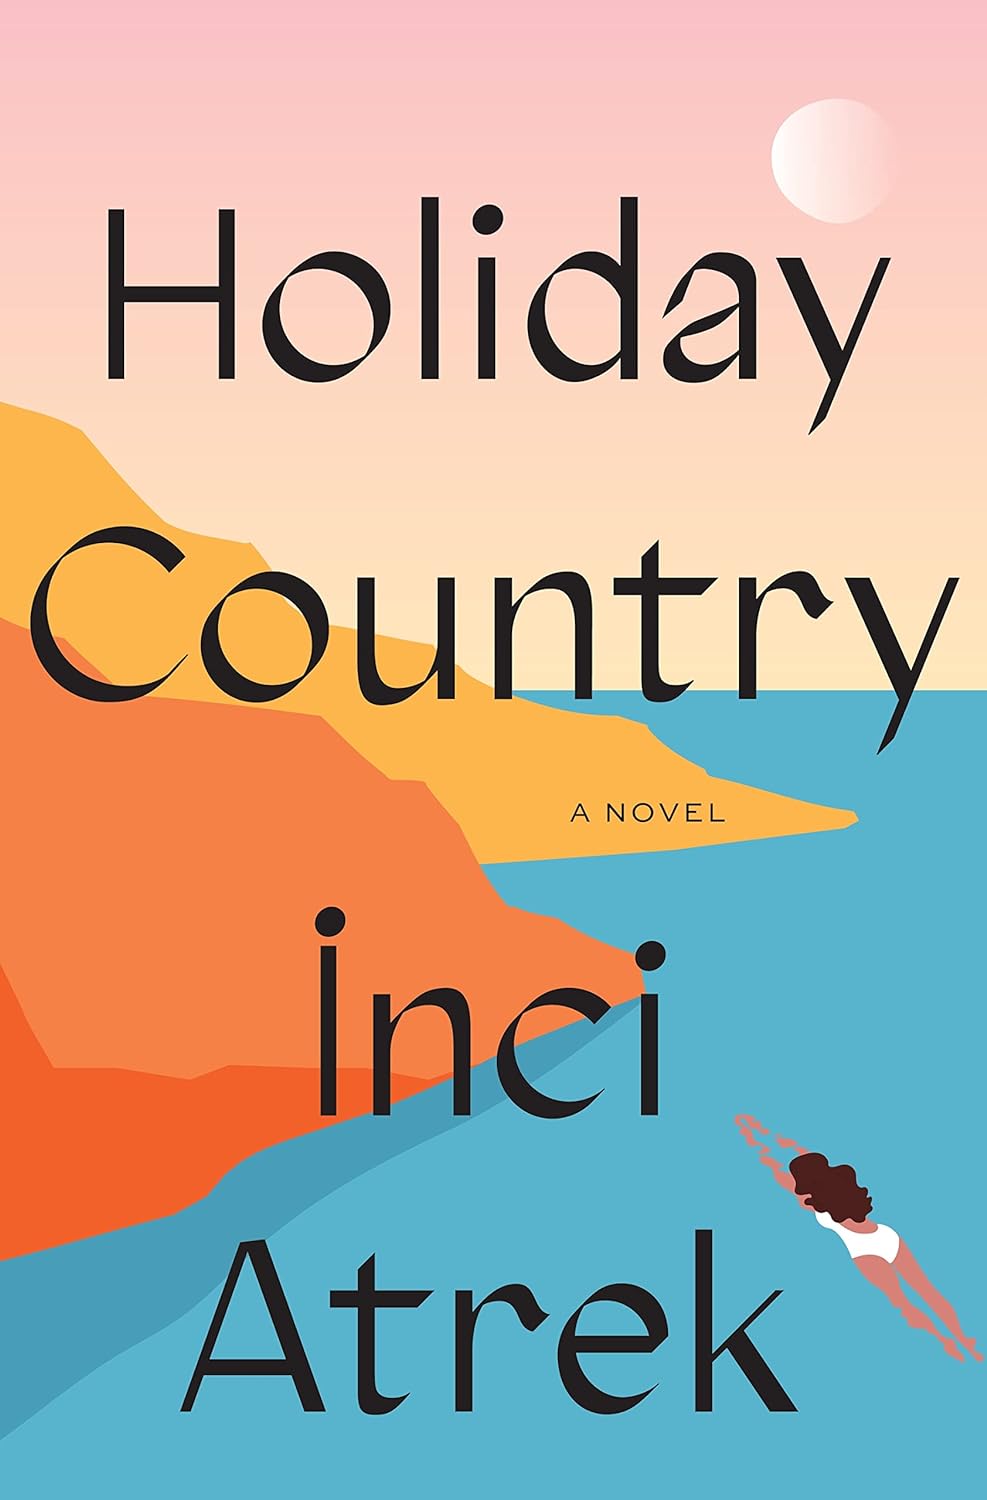 Image for "Holiday Country"